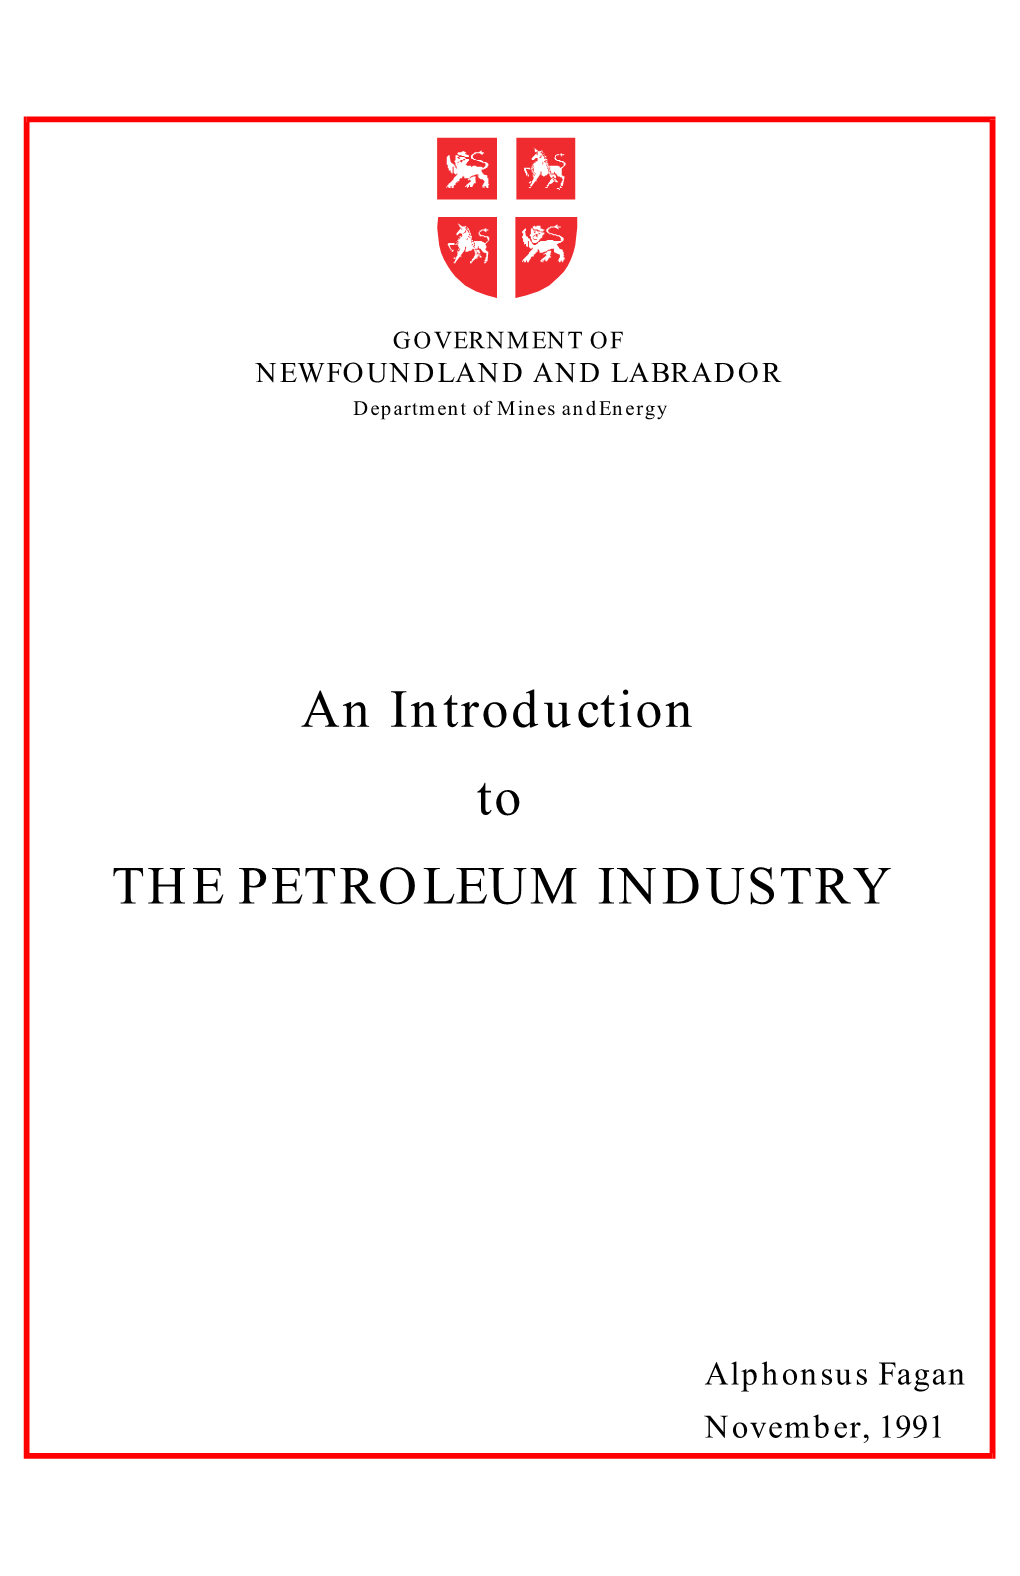 An Introduction to the Petroleum Industry